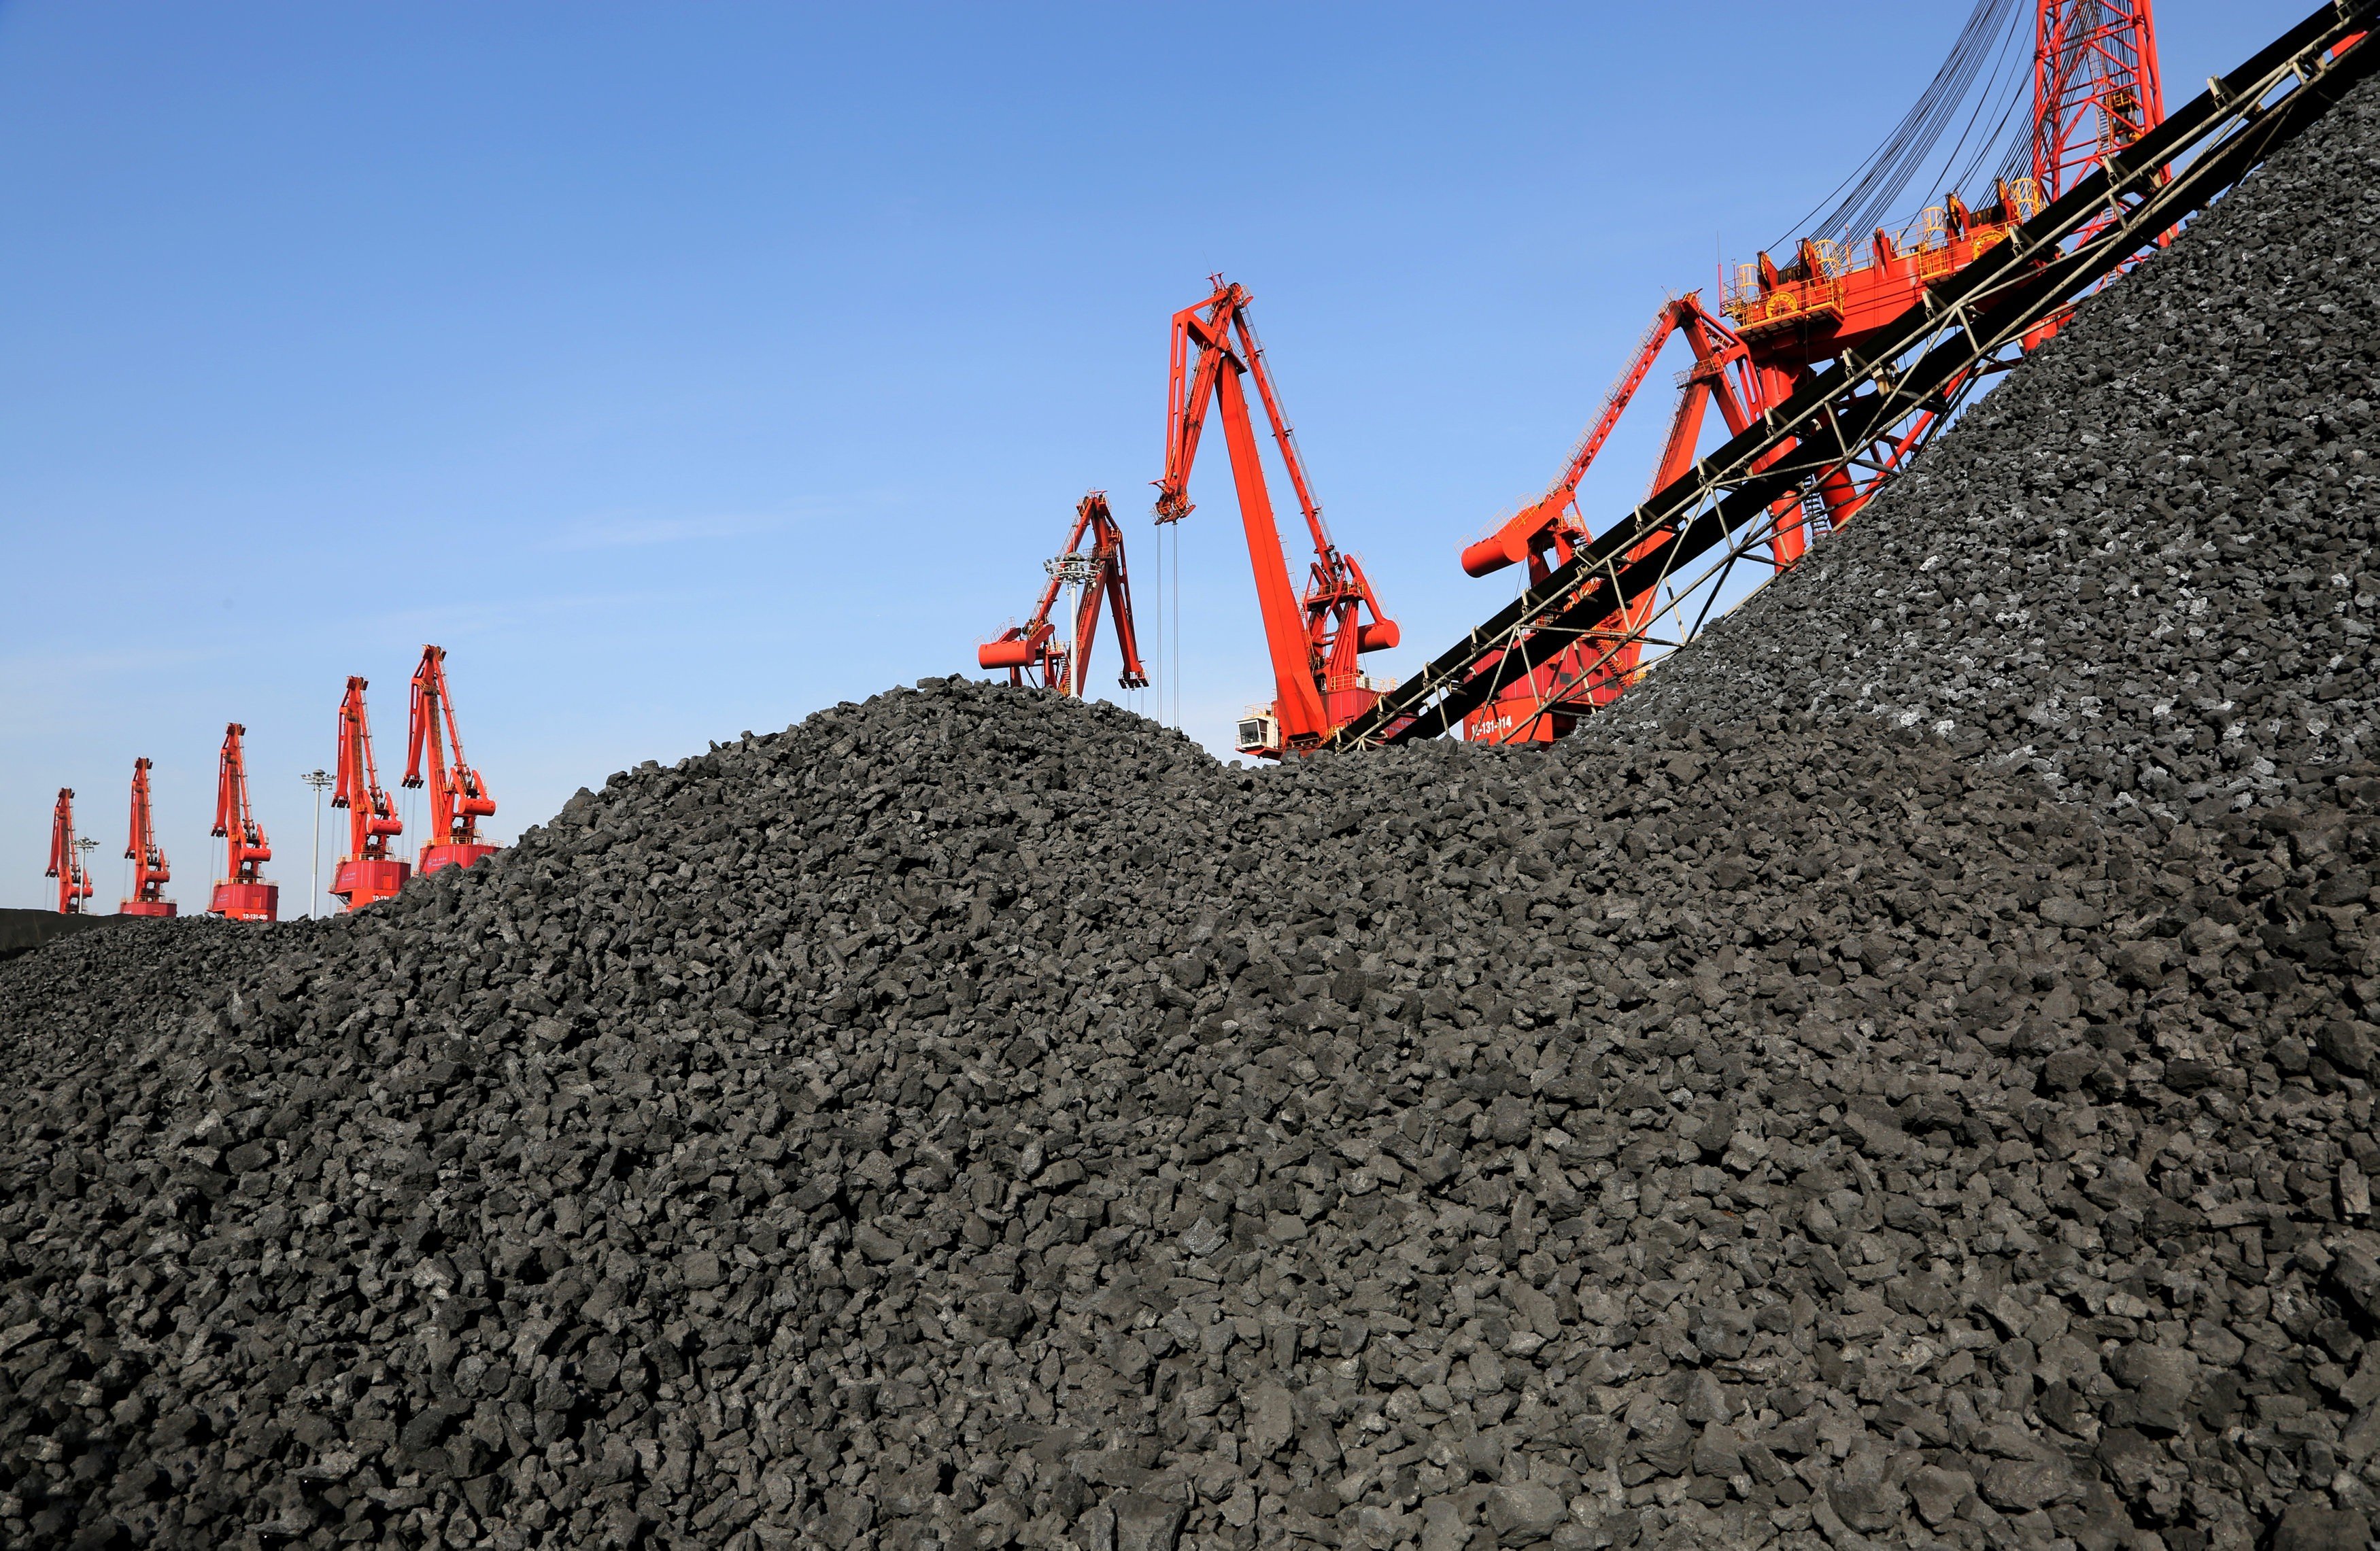 Cranes unload coal from a cargo ship at a port in Lianyungang, Jiangsu province, China. Thermal coal producers will come under more scrutiny from BlackRock. Photo: Reuters